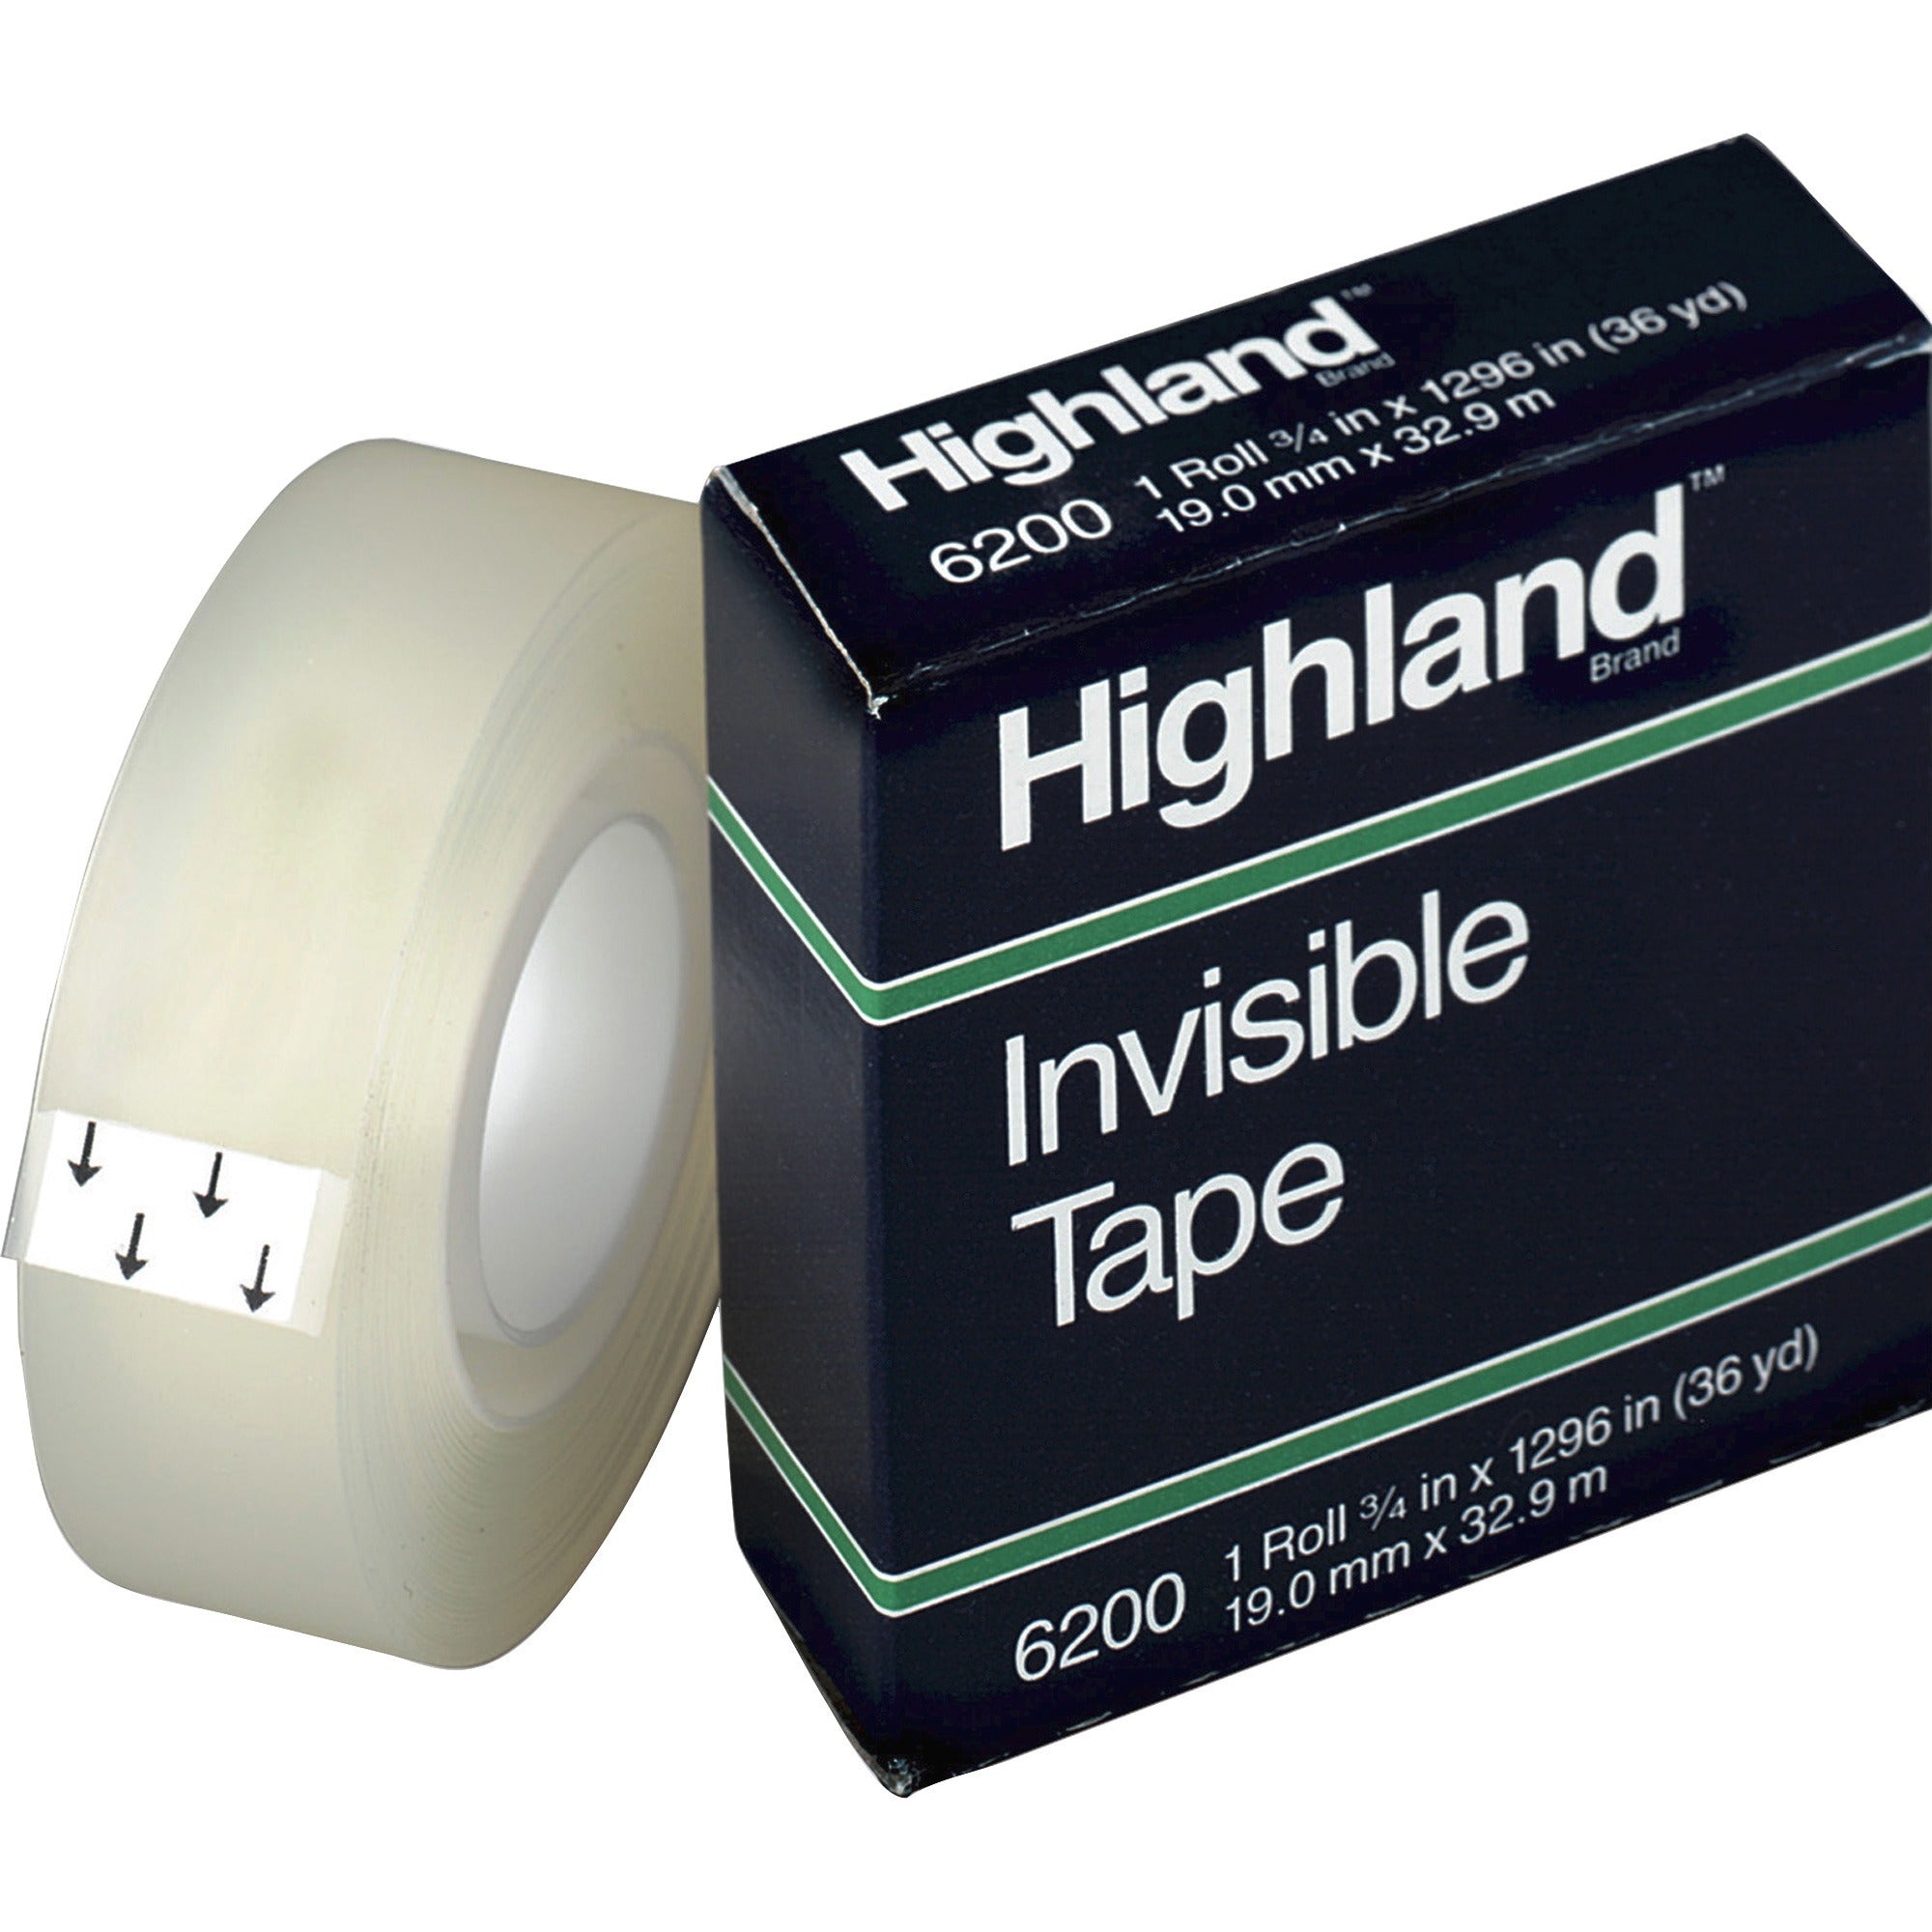 highland-matte-finish-invisible-tape-36-yd-length-x-075-width-1-core-for-mending-holding-splicing-12-pack-matte-clear_mmm6200341296pk - 1